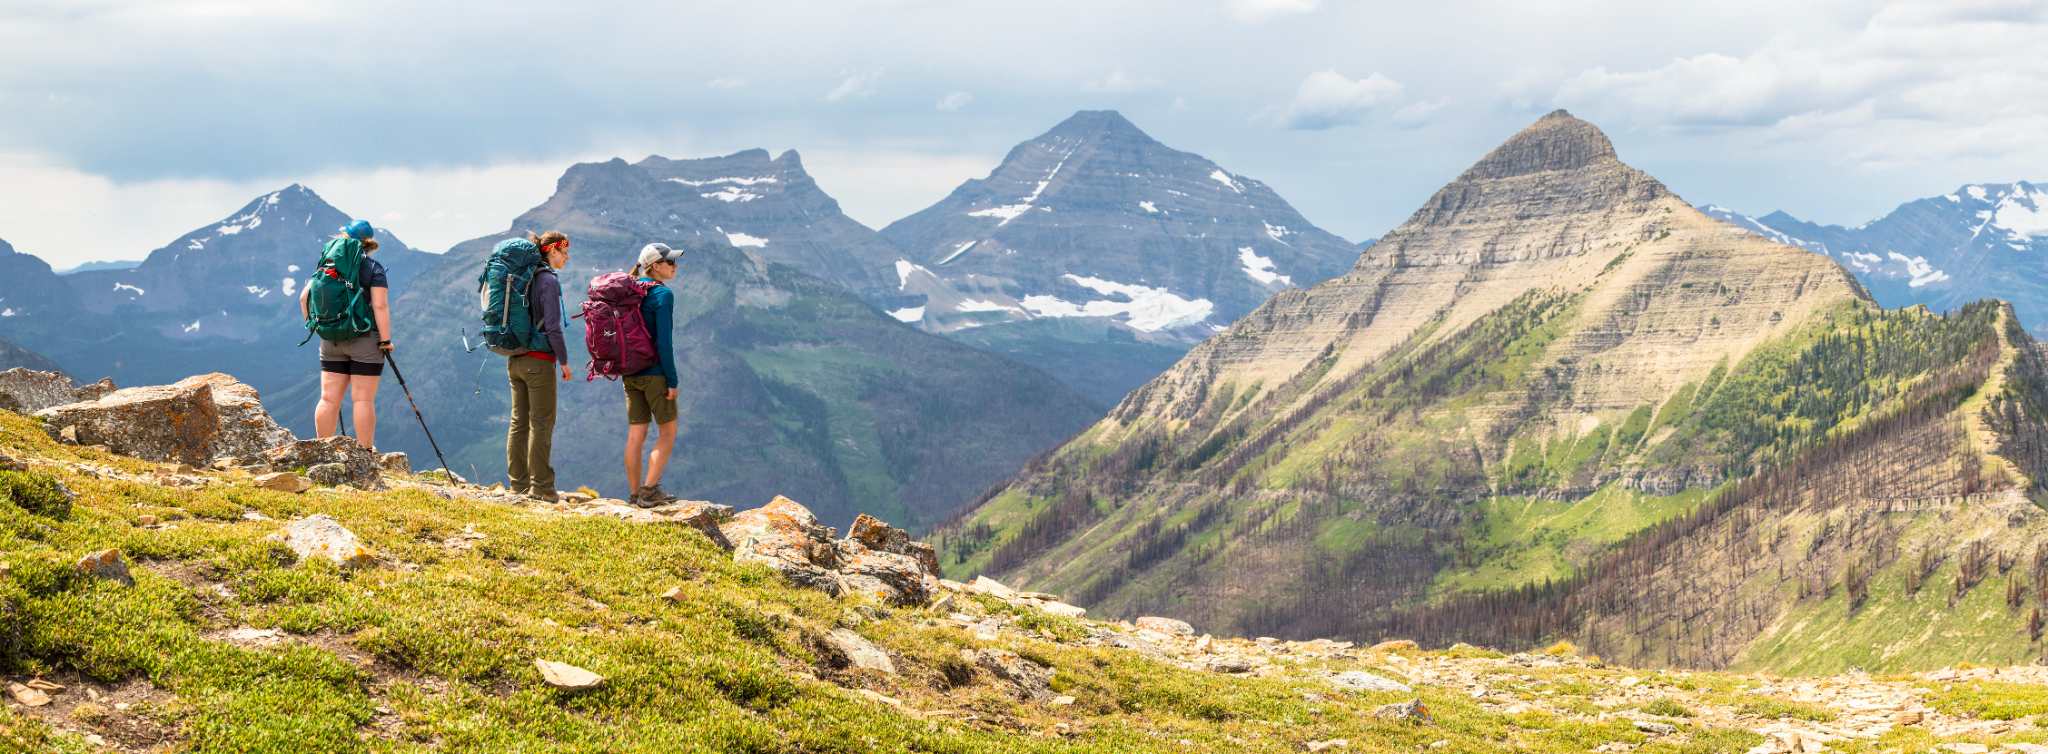 several women hiking in Glacier Park on mountain pass